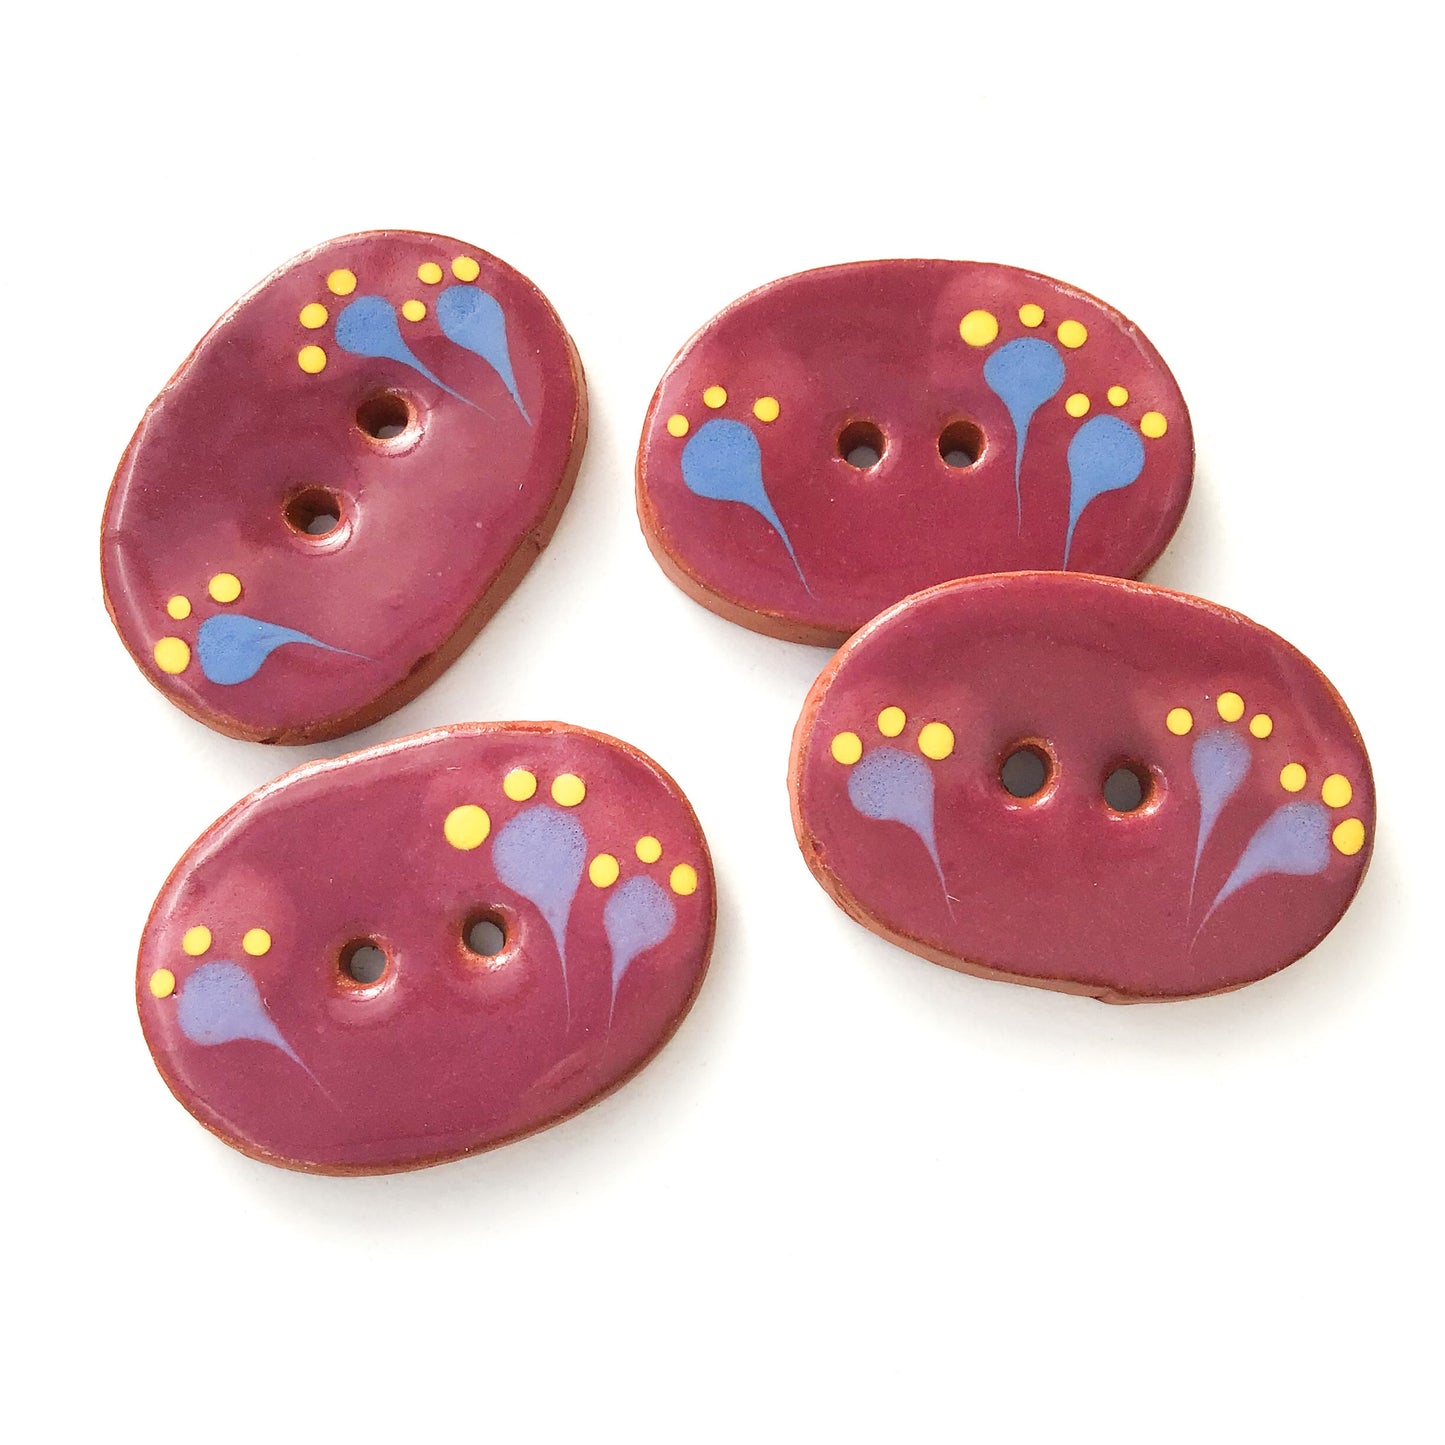 Wine Purple Ceramic Buttons with Blue & Yellow Flowers - Oval Clay Buttons - 7/8" x 1 1/4"